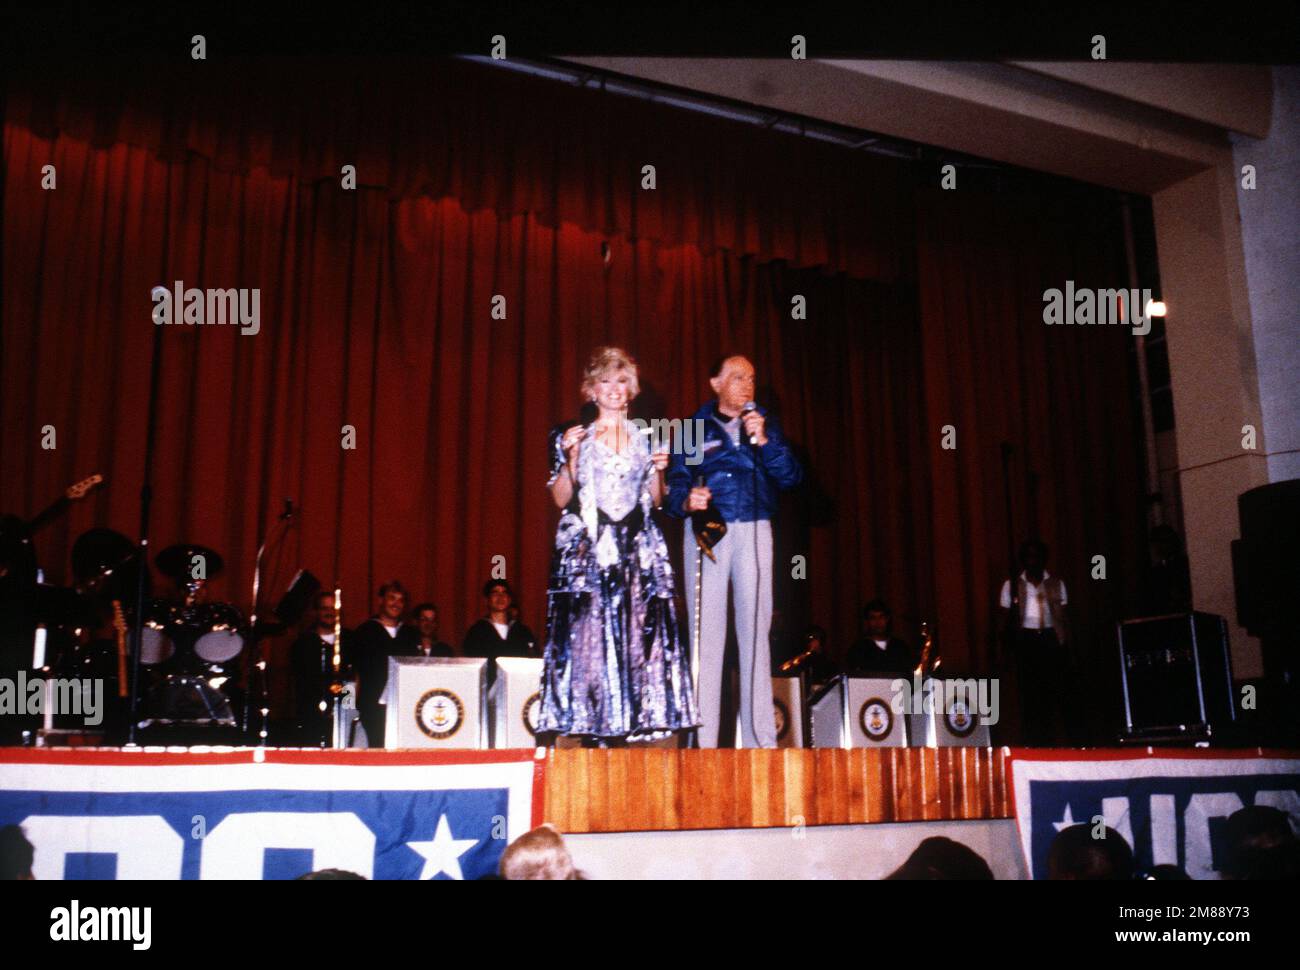 Entertainers Bob Hope and Connie Stevens, backed by the Pacific Fleet Band, perform at a United Service Organizations (USO) show in the base theater. Base: Naval Station, Rota Country: Spain (ESP) Stock Photo